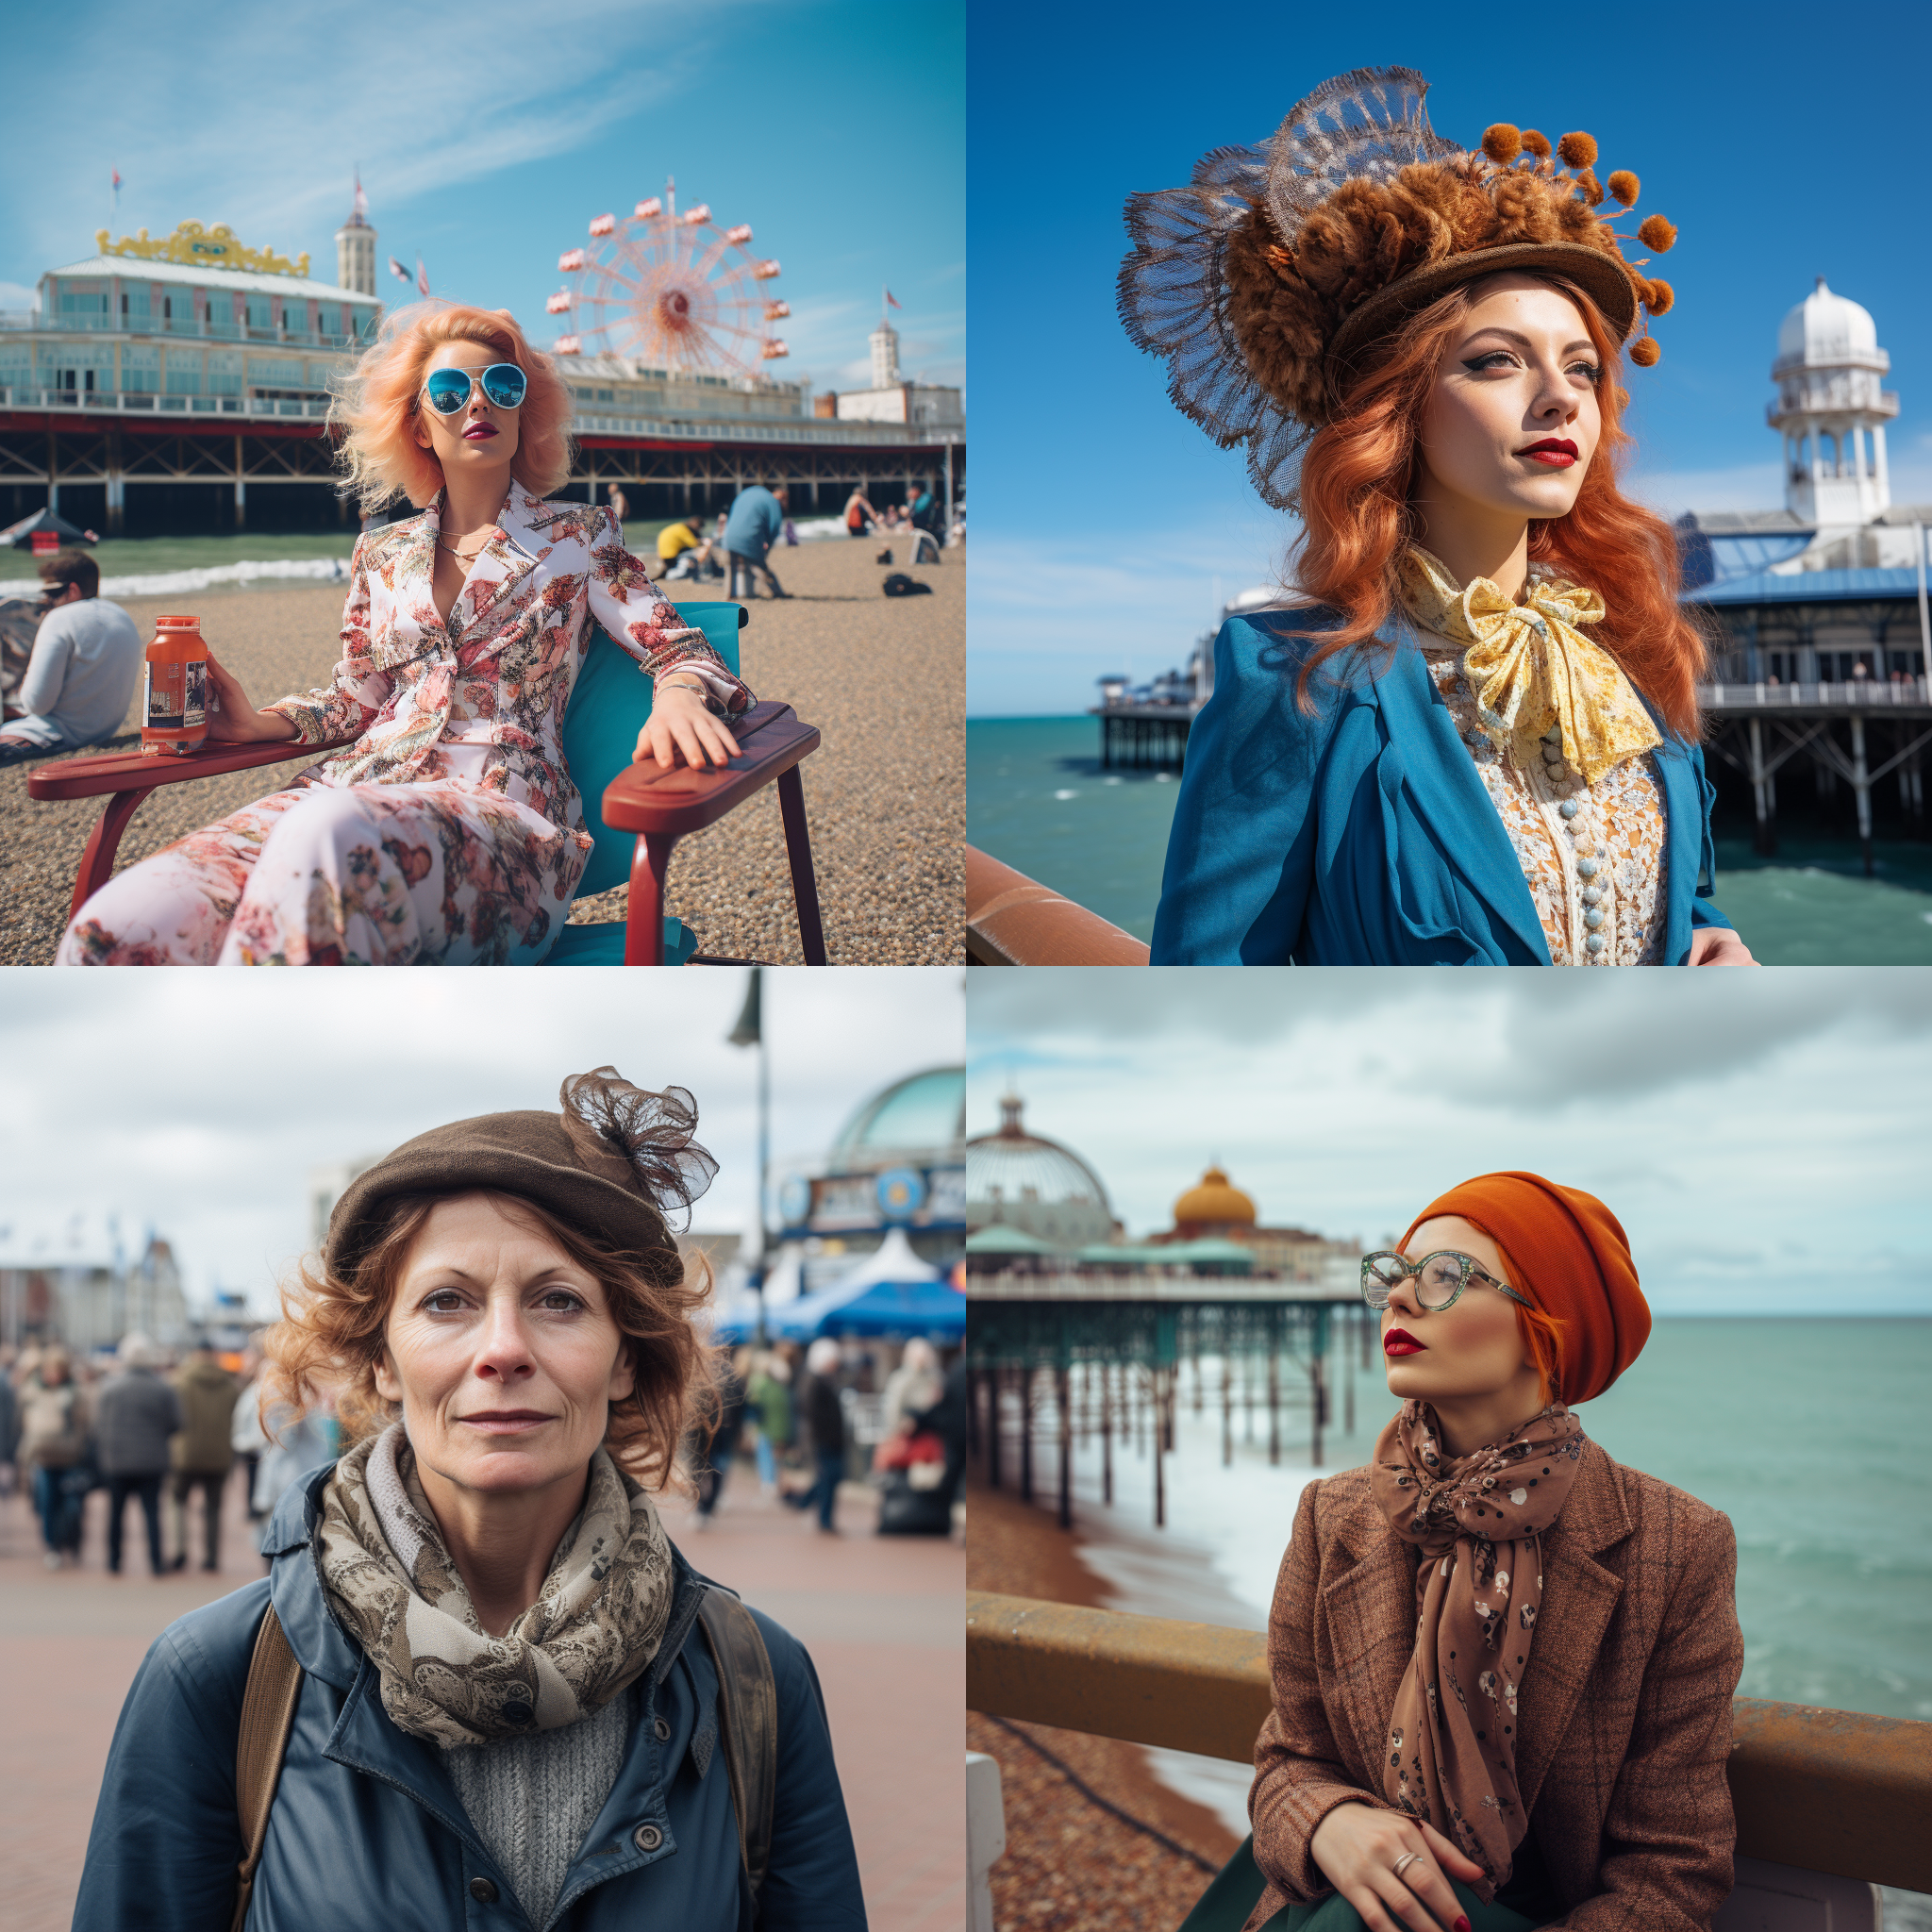 The most steroetypical woman in Brighton